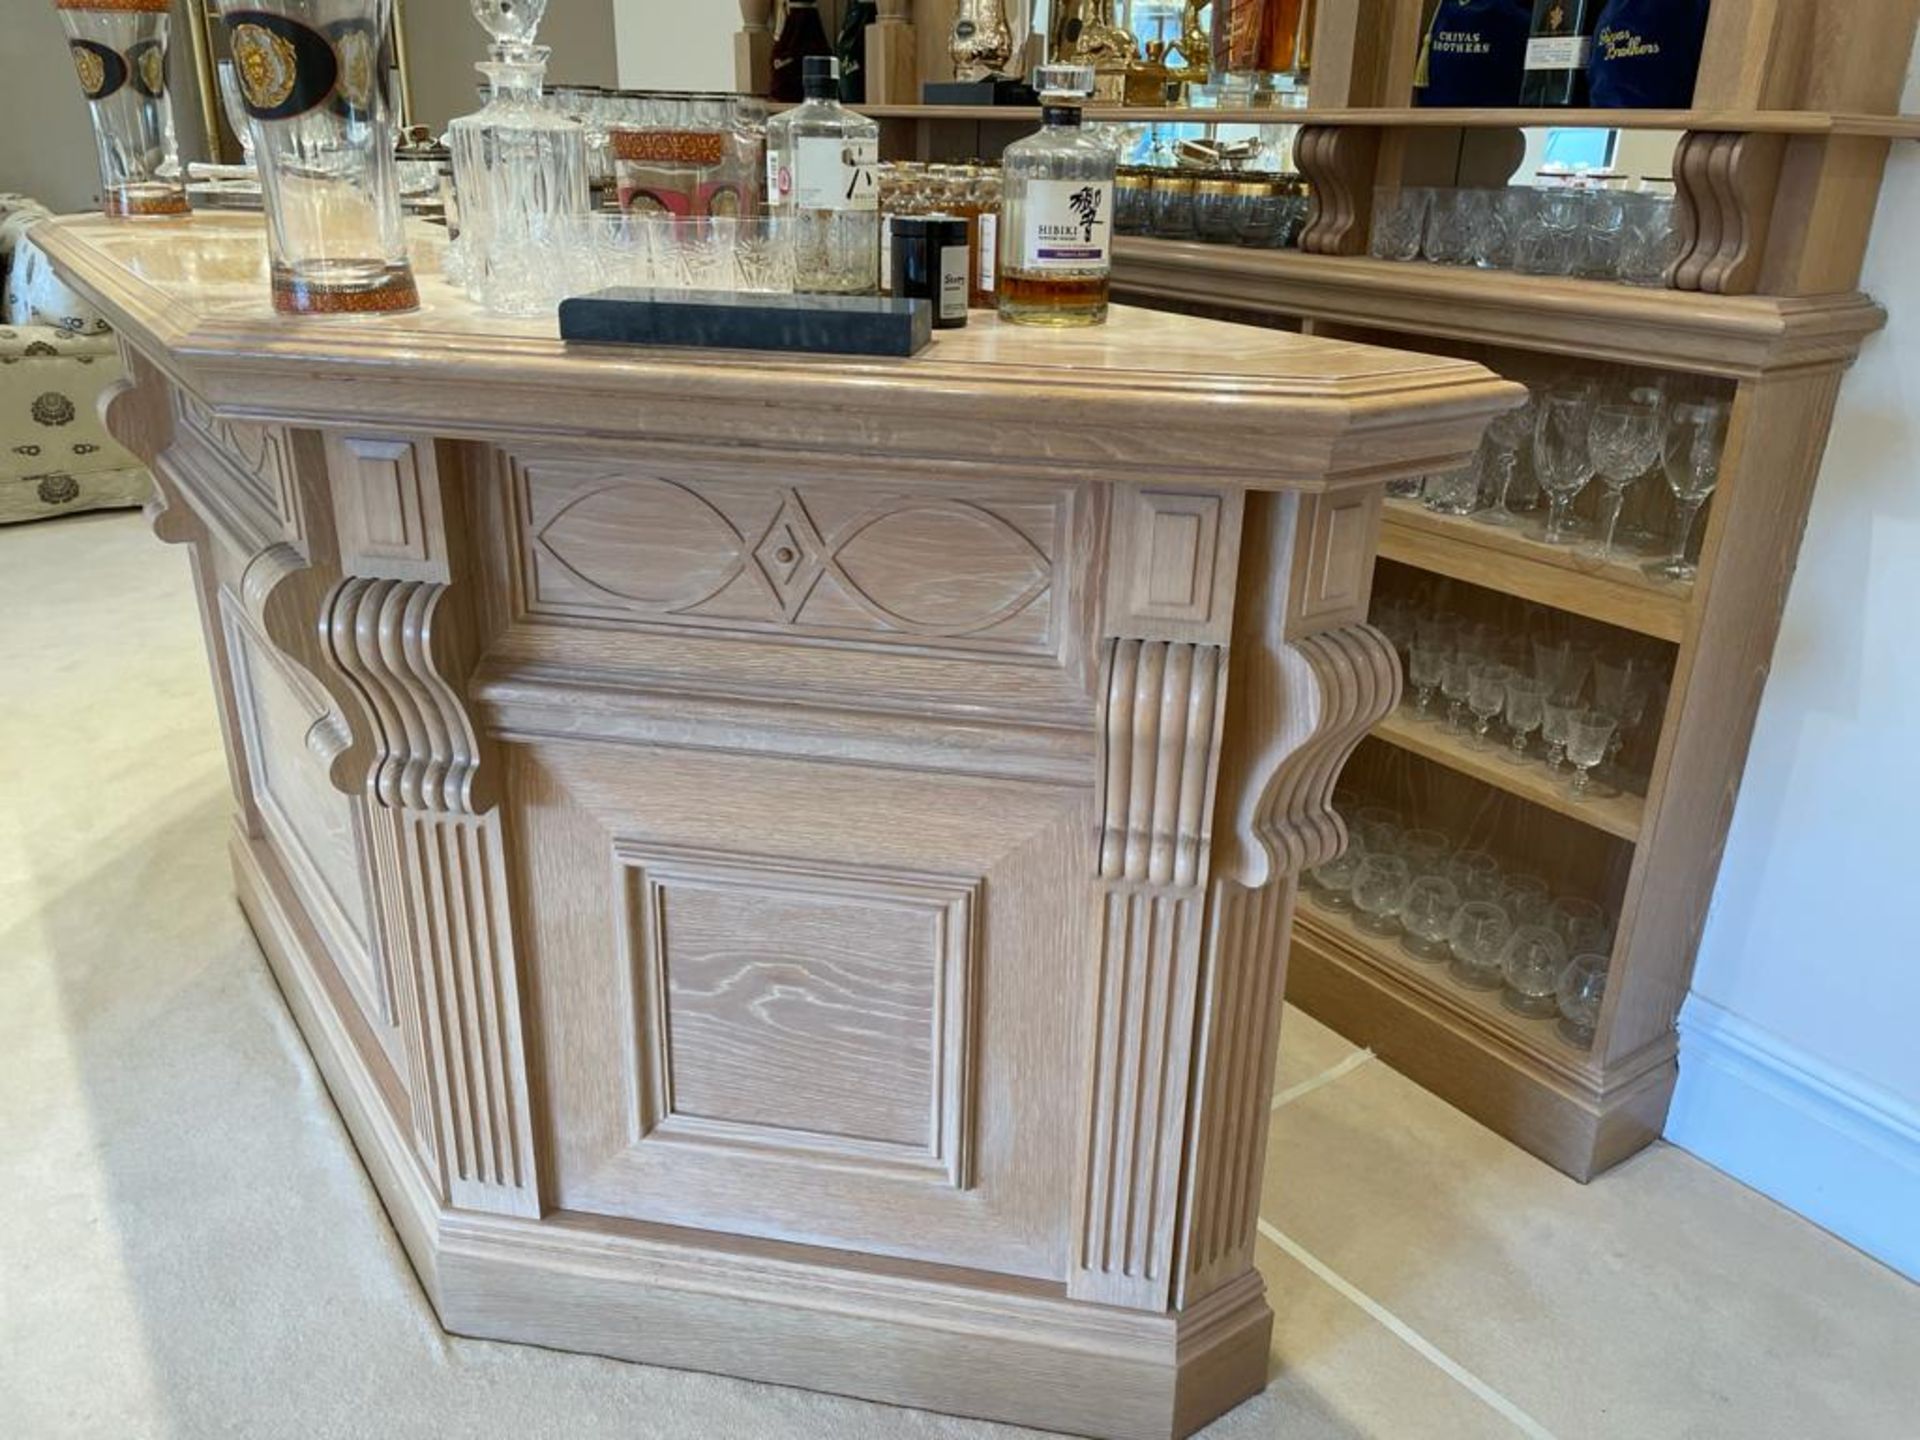 1 x Bespoke Solid Beech Home Bar With Backbar - Beautifully Crafted With Panelling and Curved - Image 14 of 25